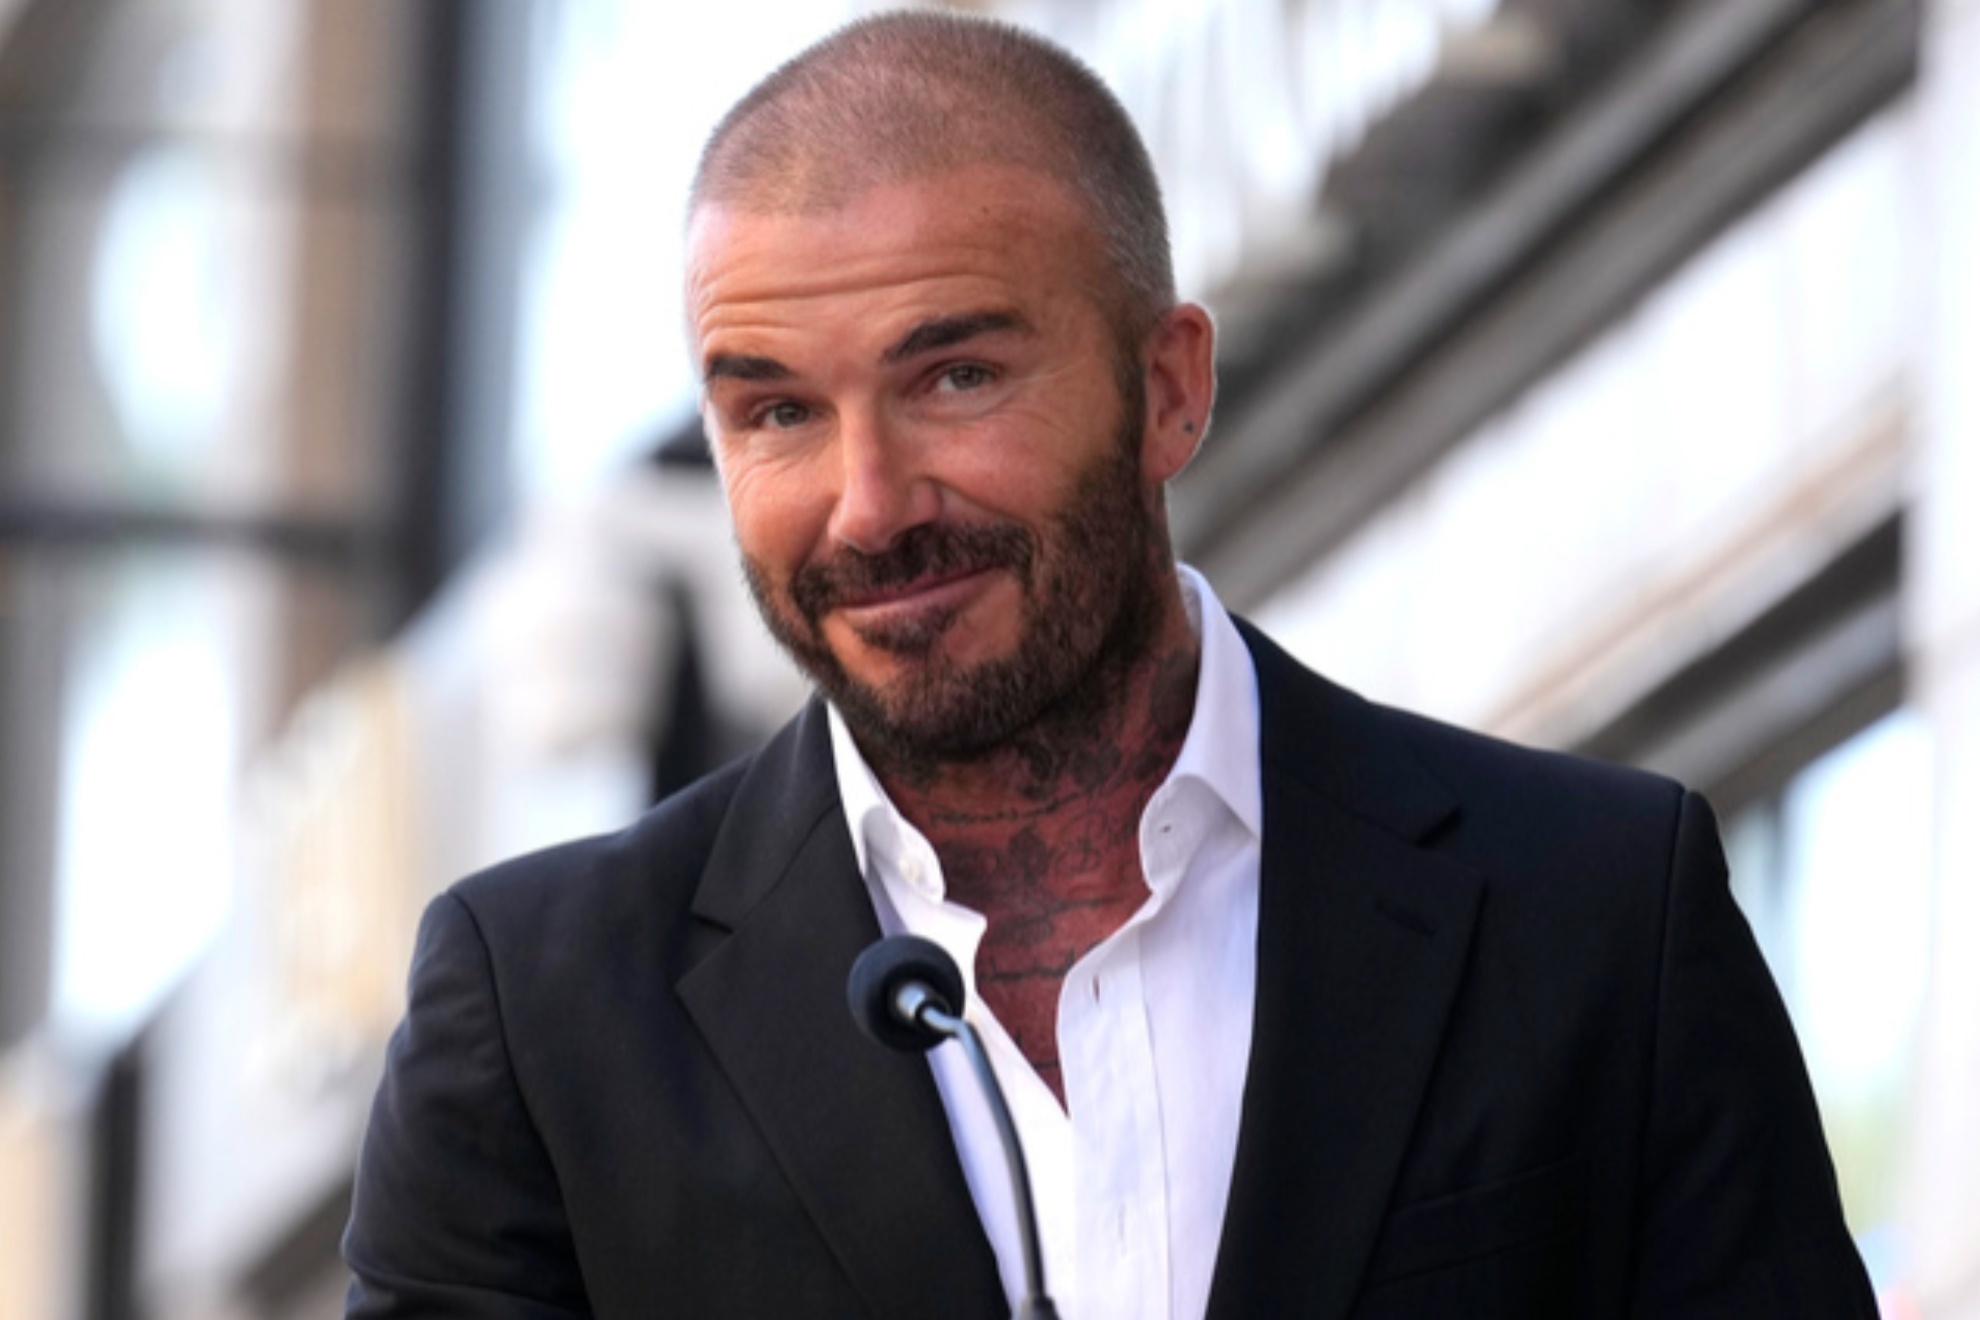 David Beckham has a reported net worth over $512 million dollars